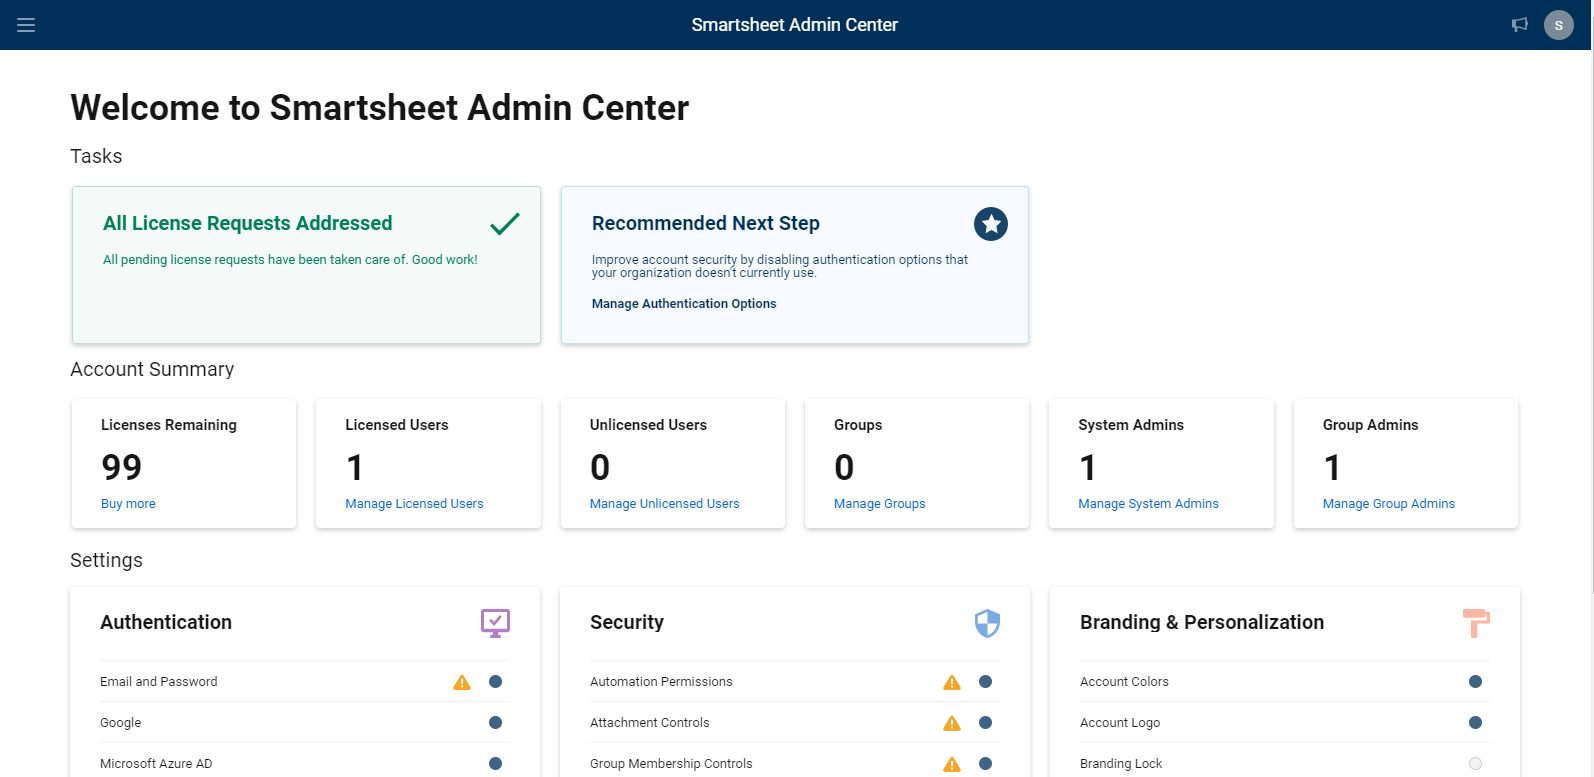 Admin Center home page